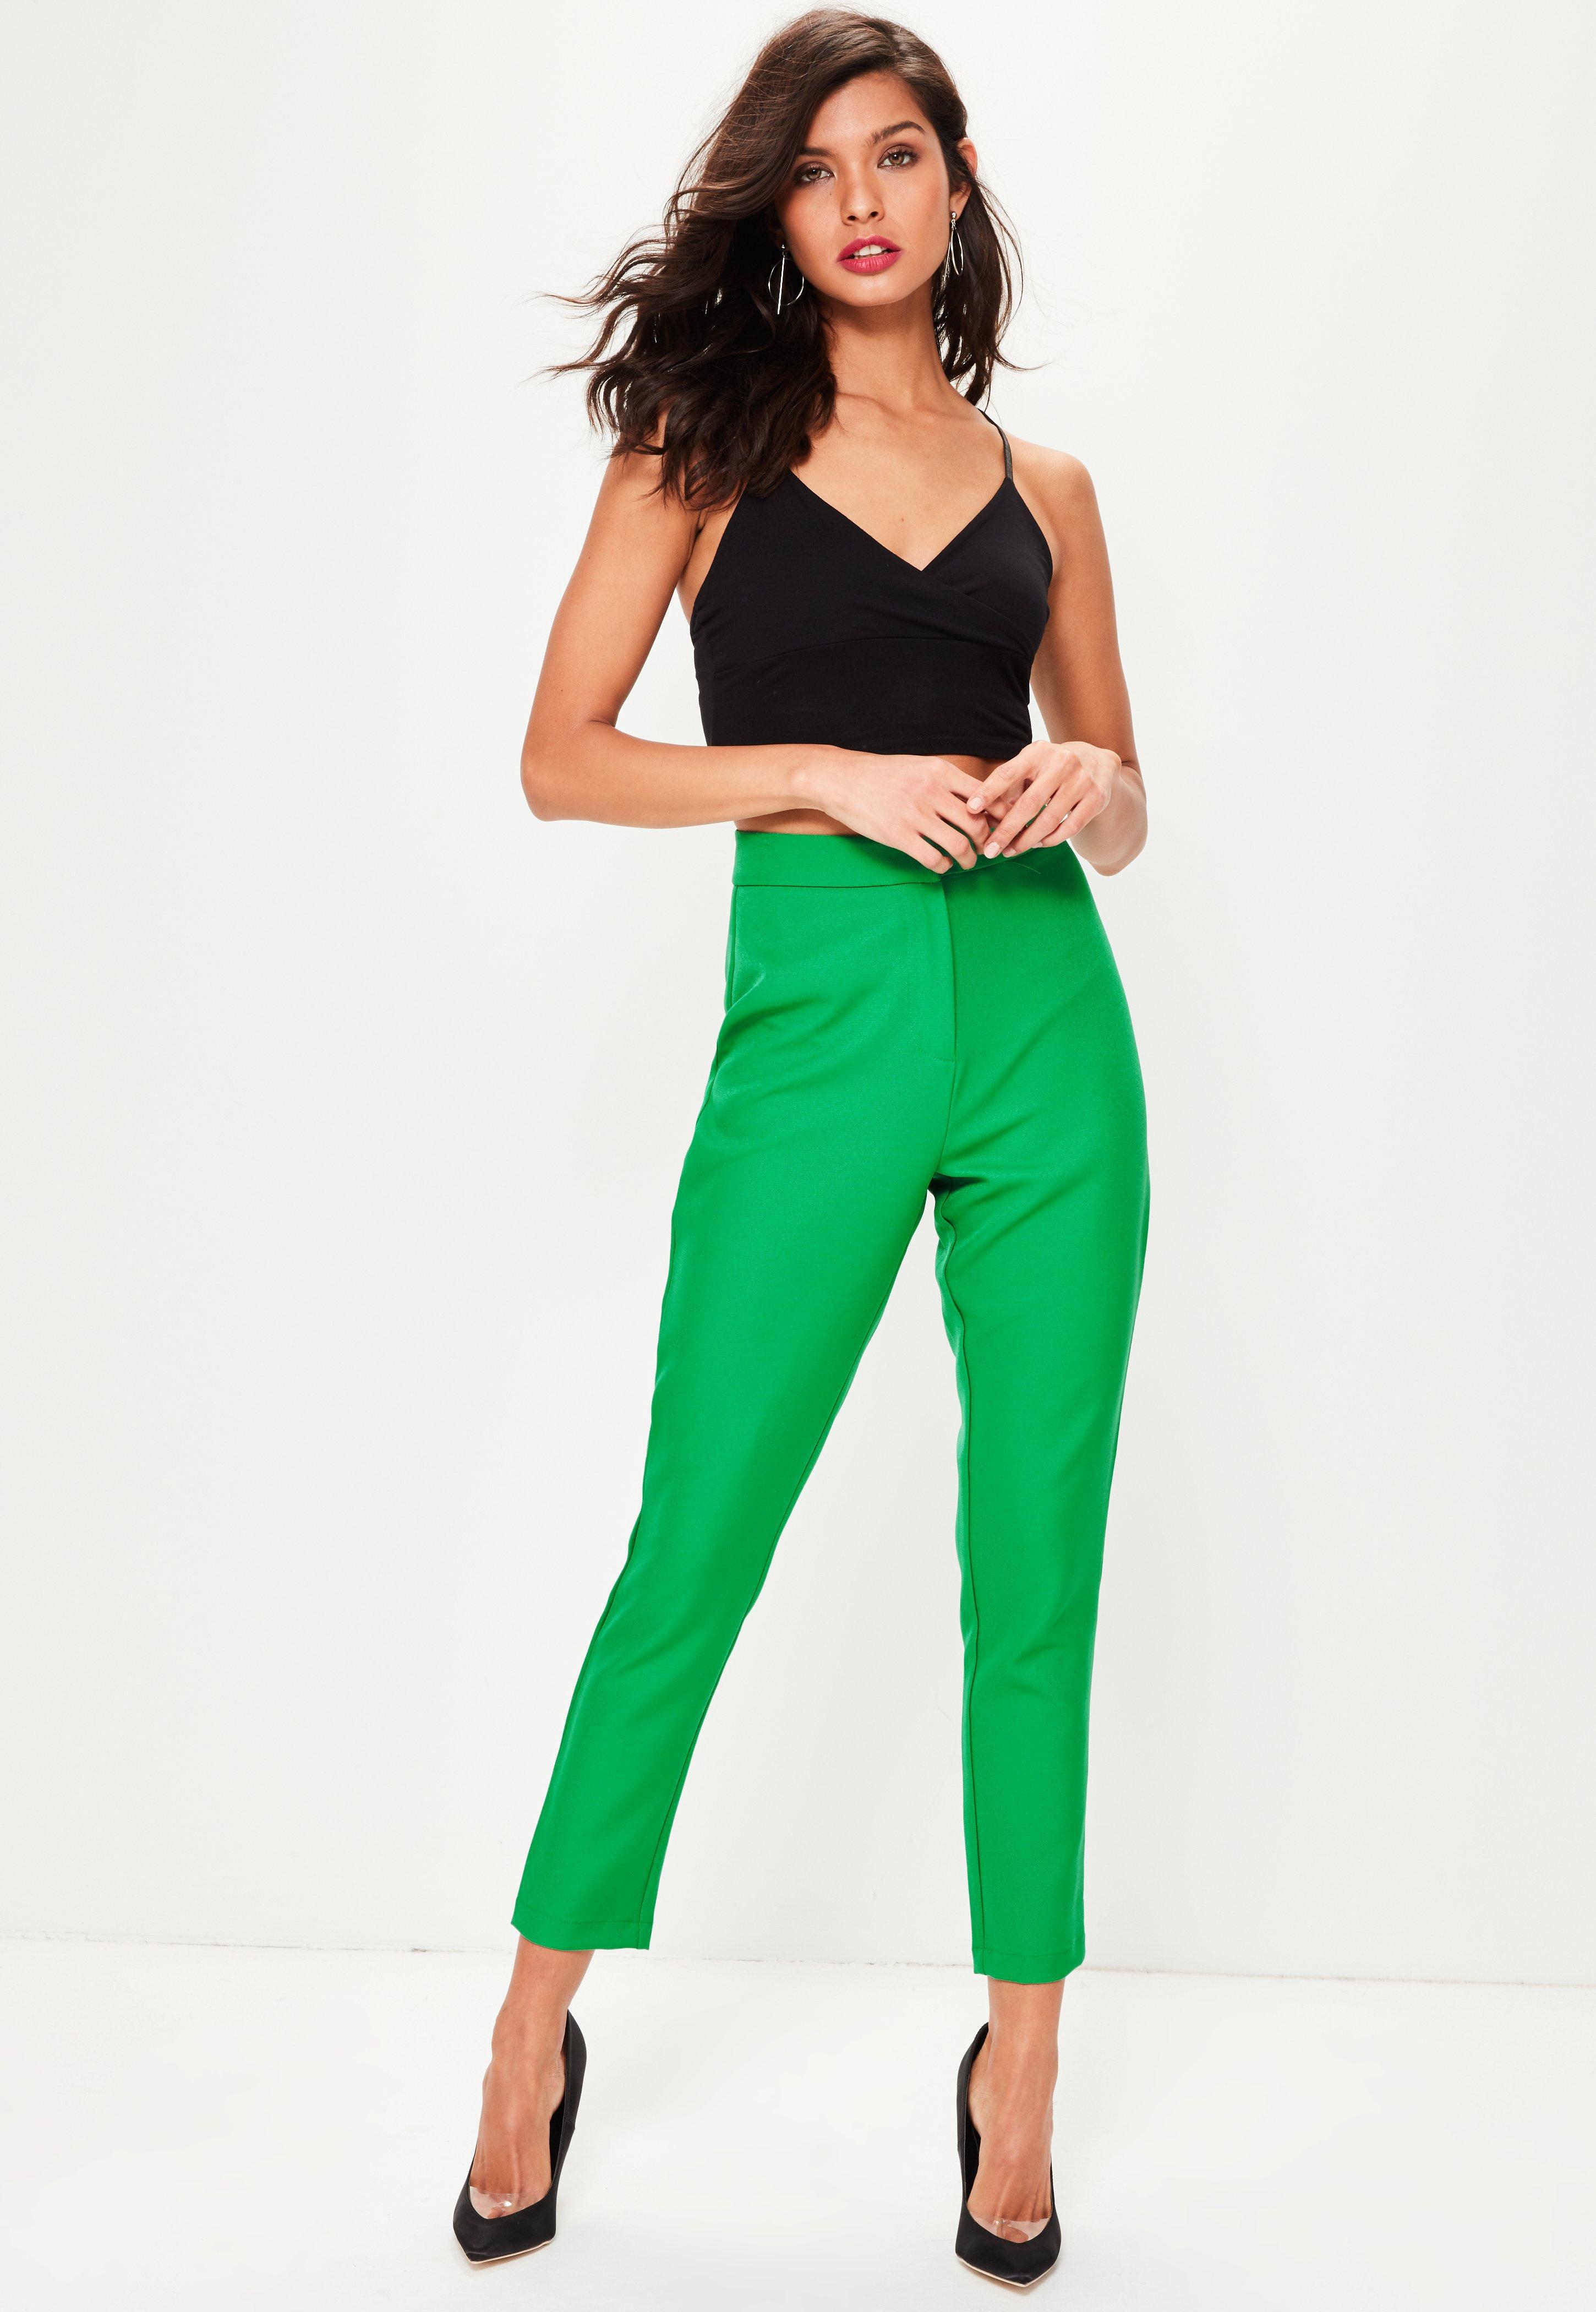 Lyst - Missguided Green Tailored Pants in Green